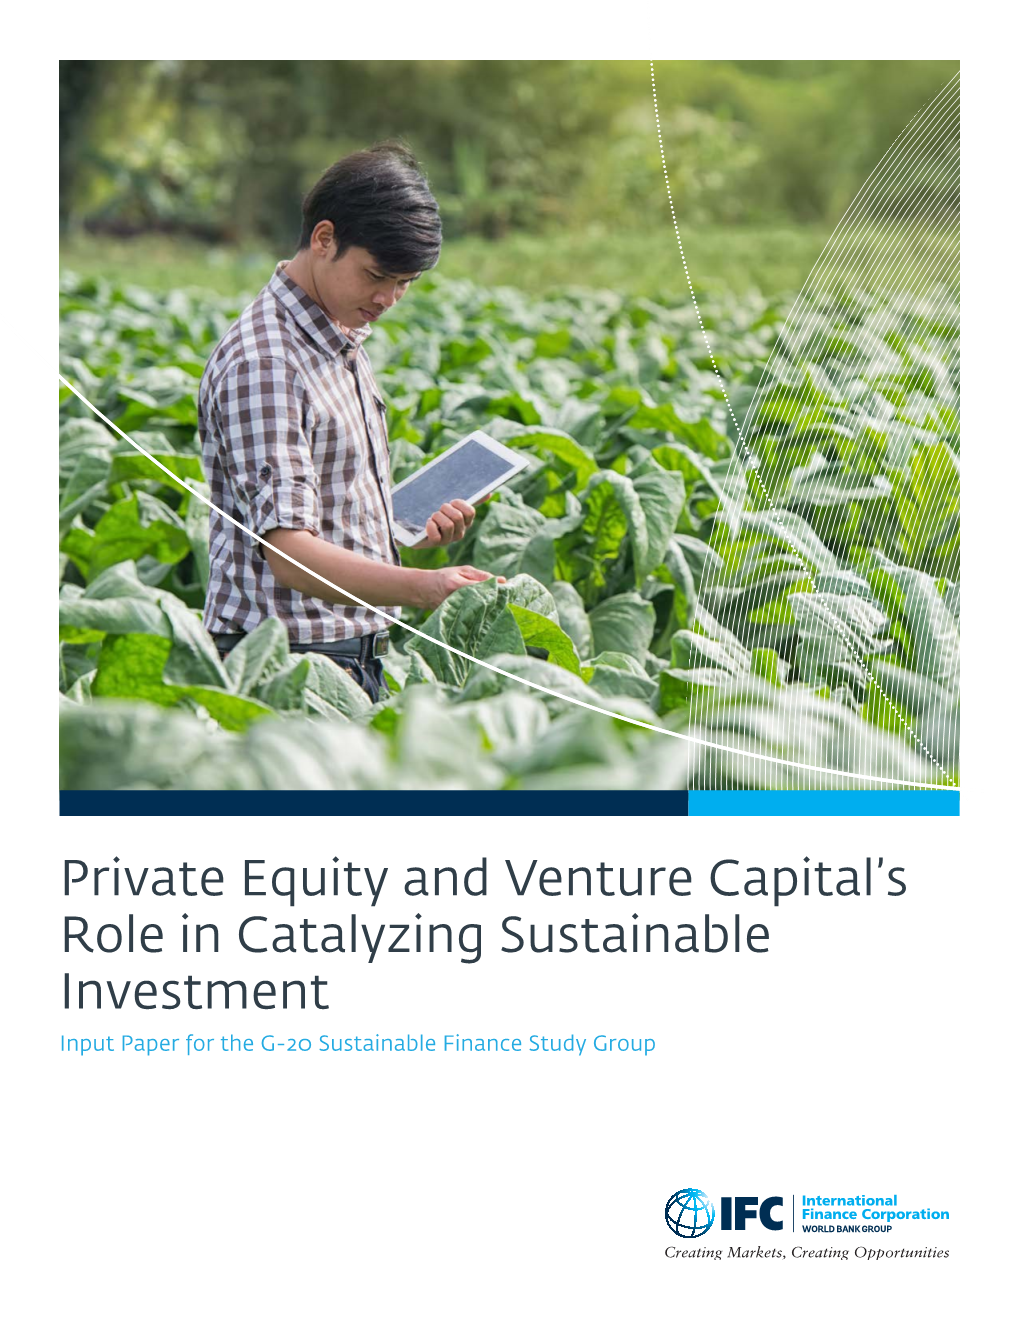 Private Equity and Venture Capital's Role in Catalyzing Sustainable